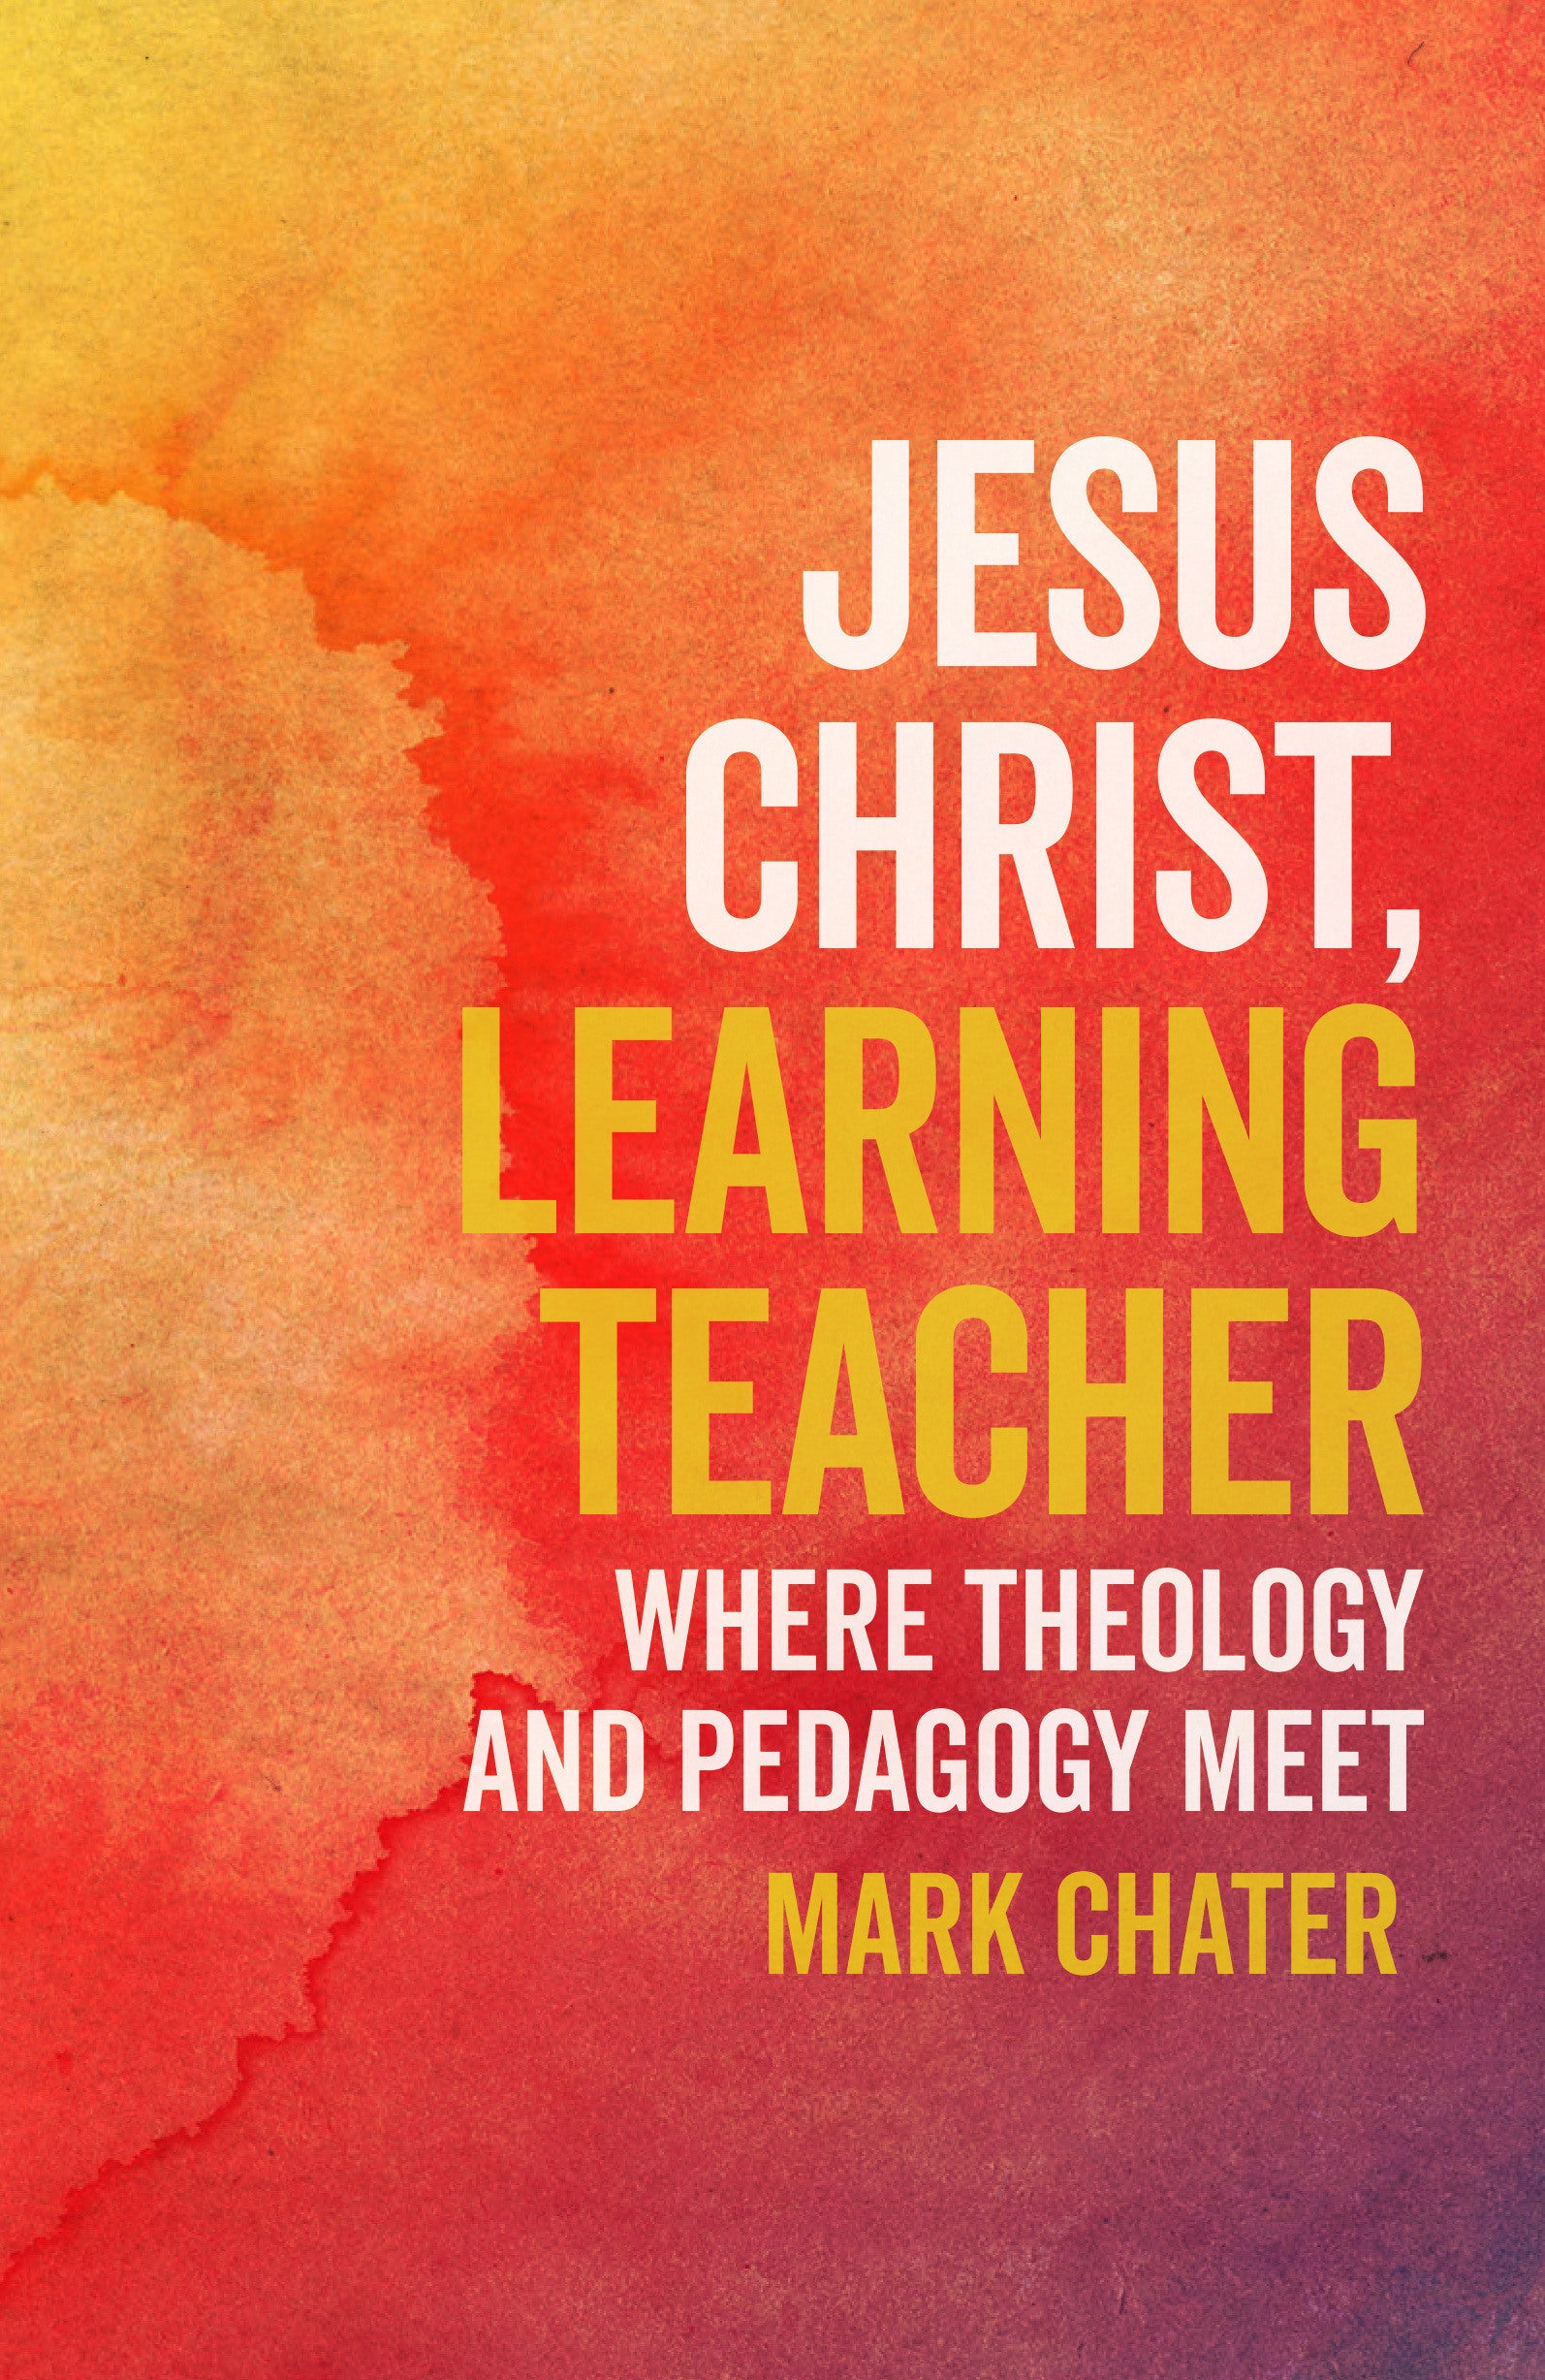 Image of Jesus Christ, Learning Teacher other